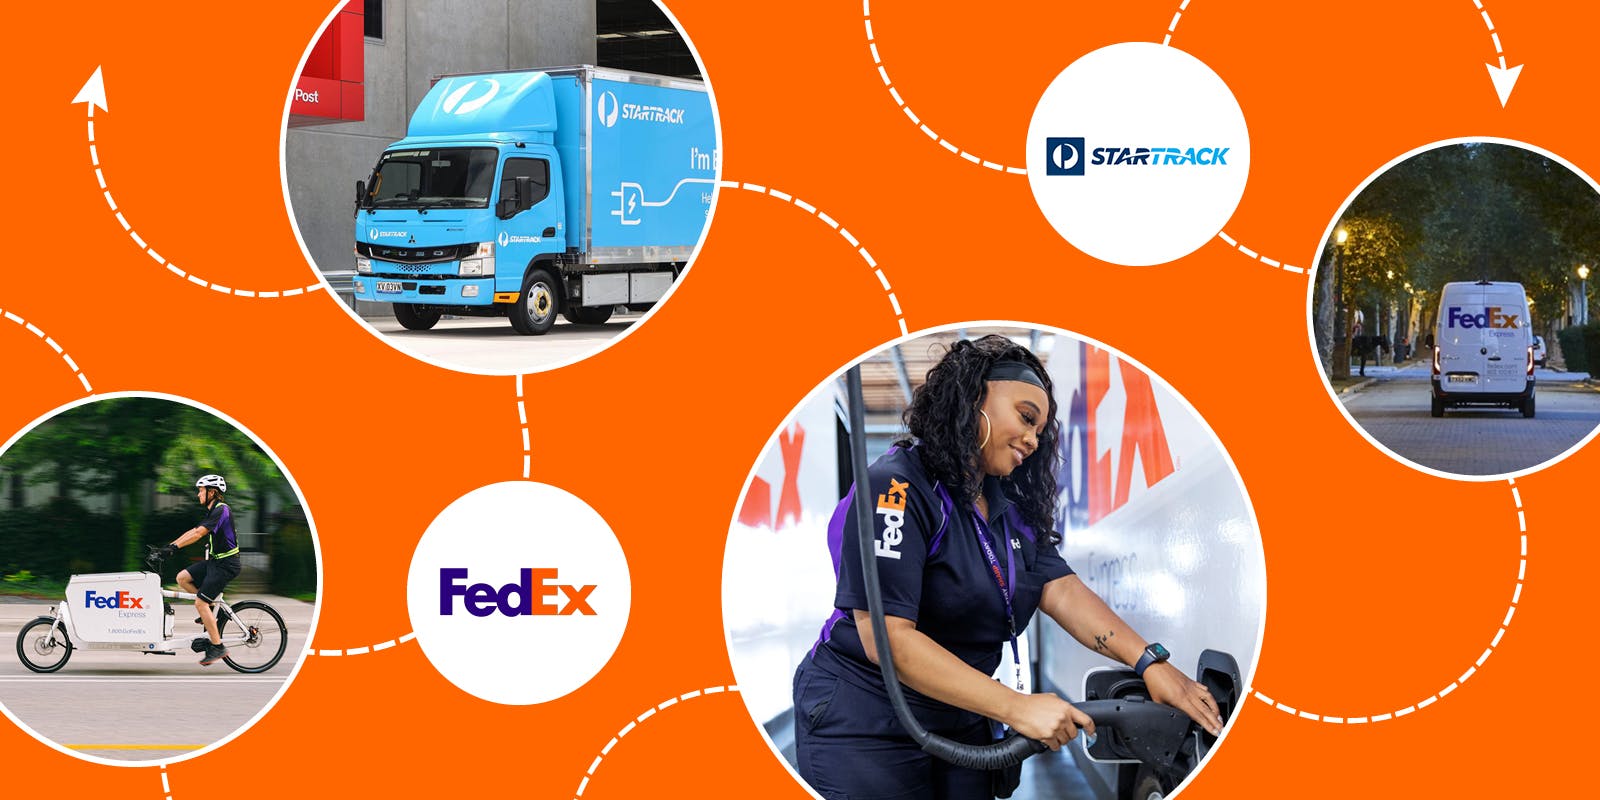 Working with FedEx and StarTrack